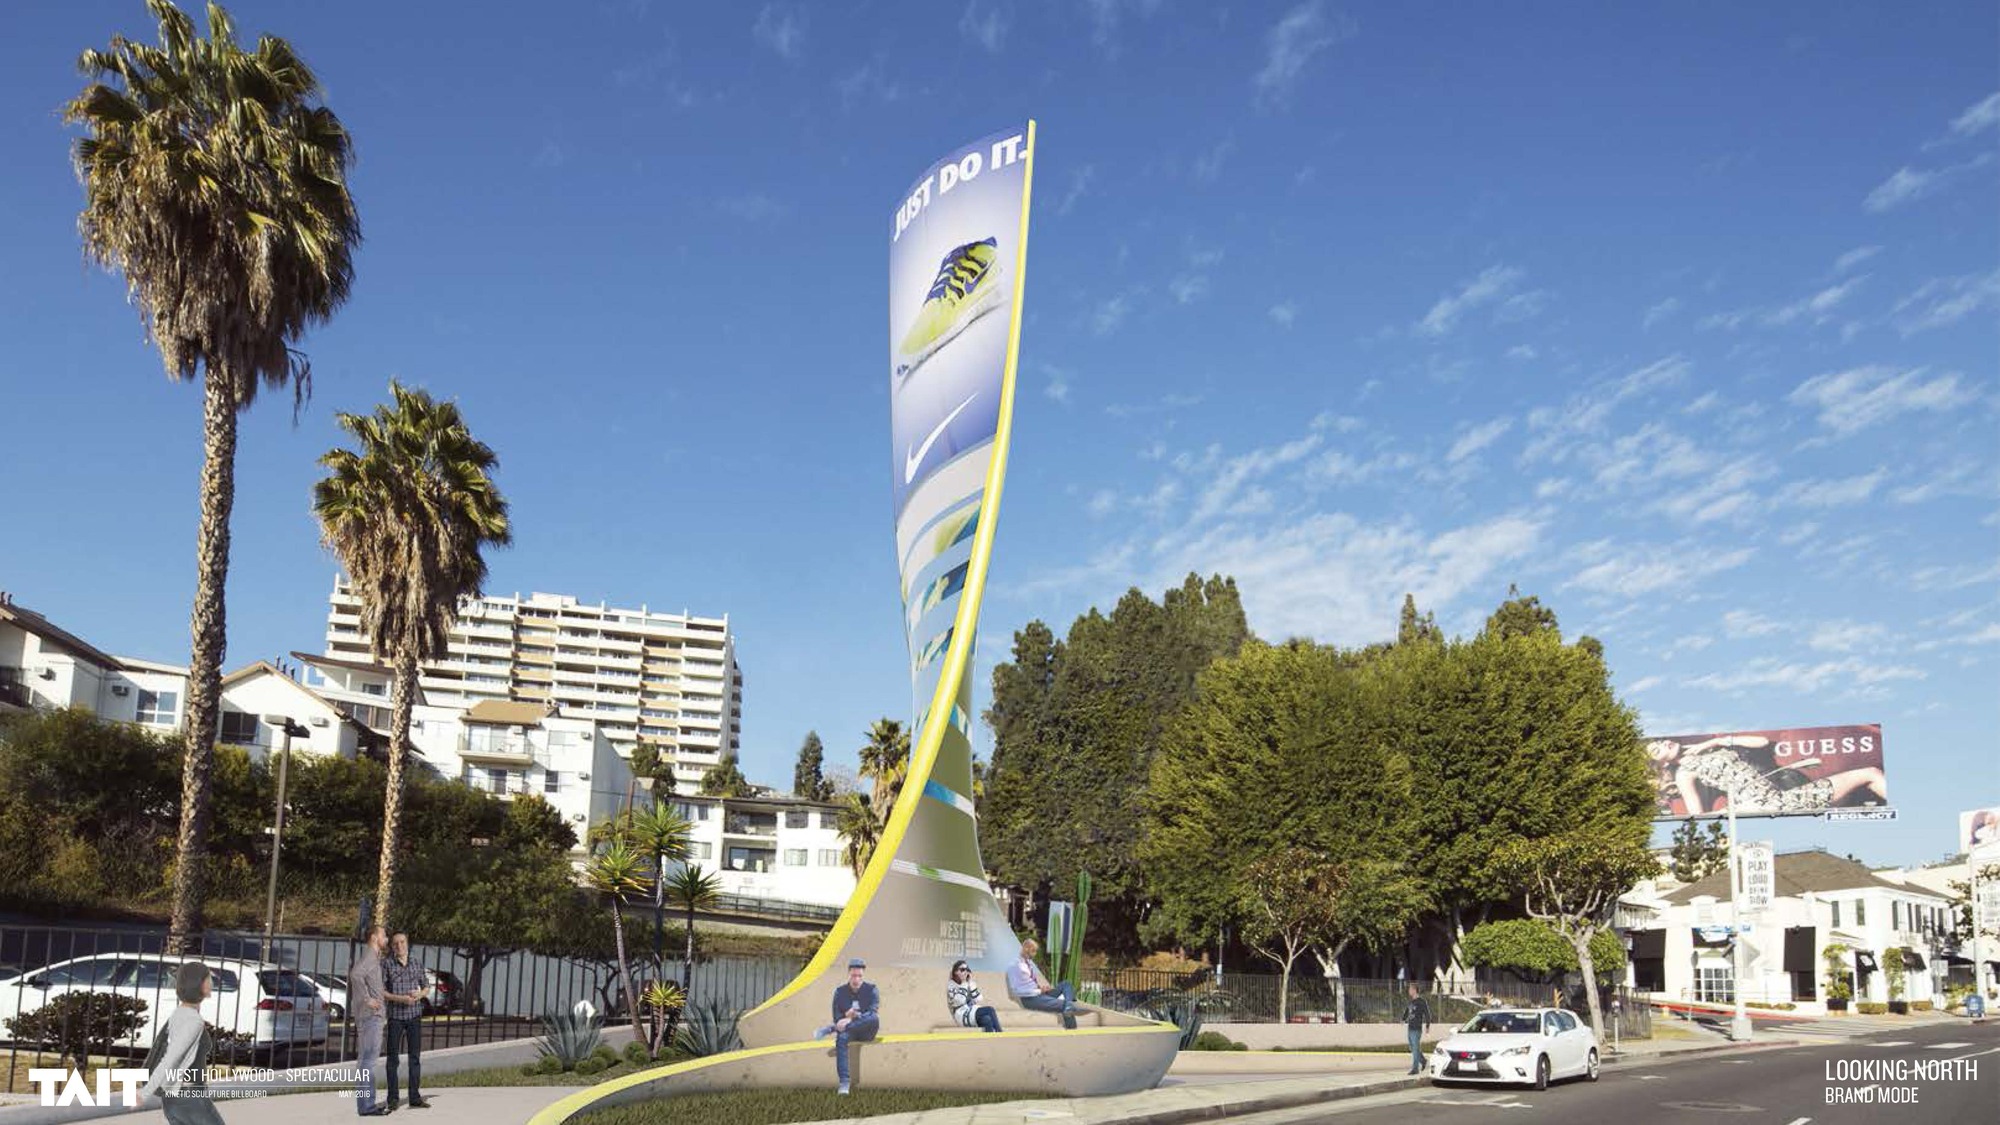 Tait Towers Inc. – The Vortex / Source: City of West Hollywood